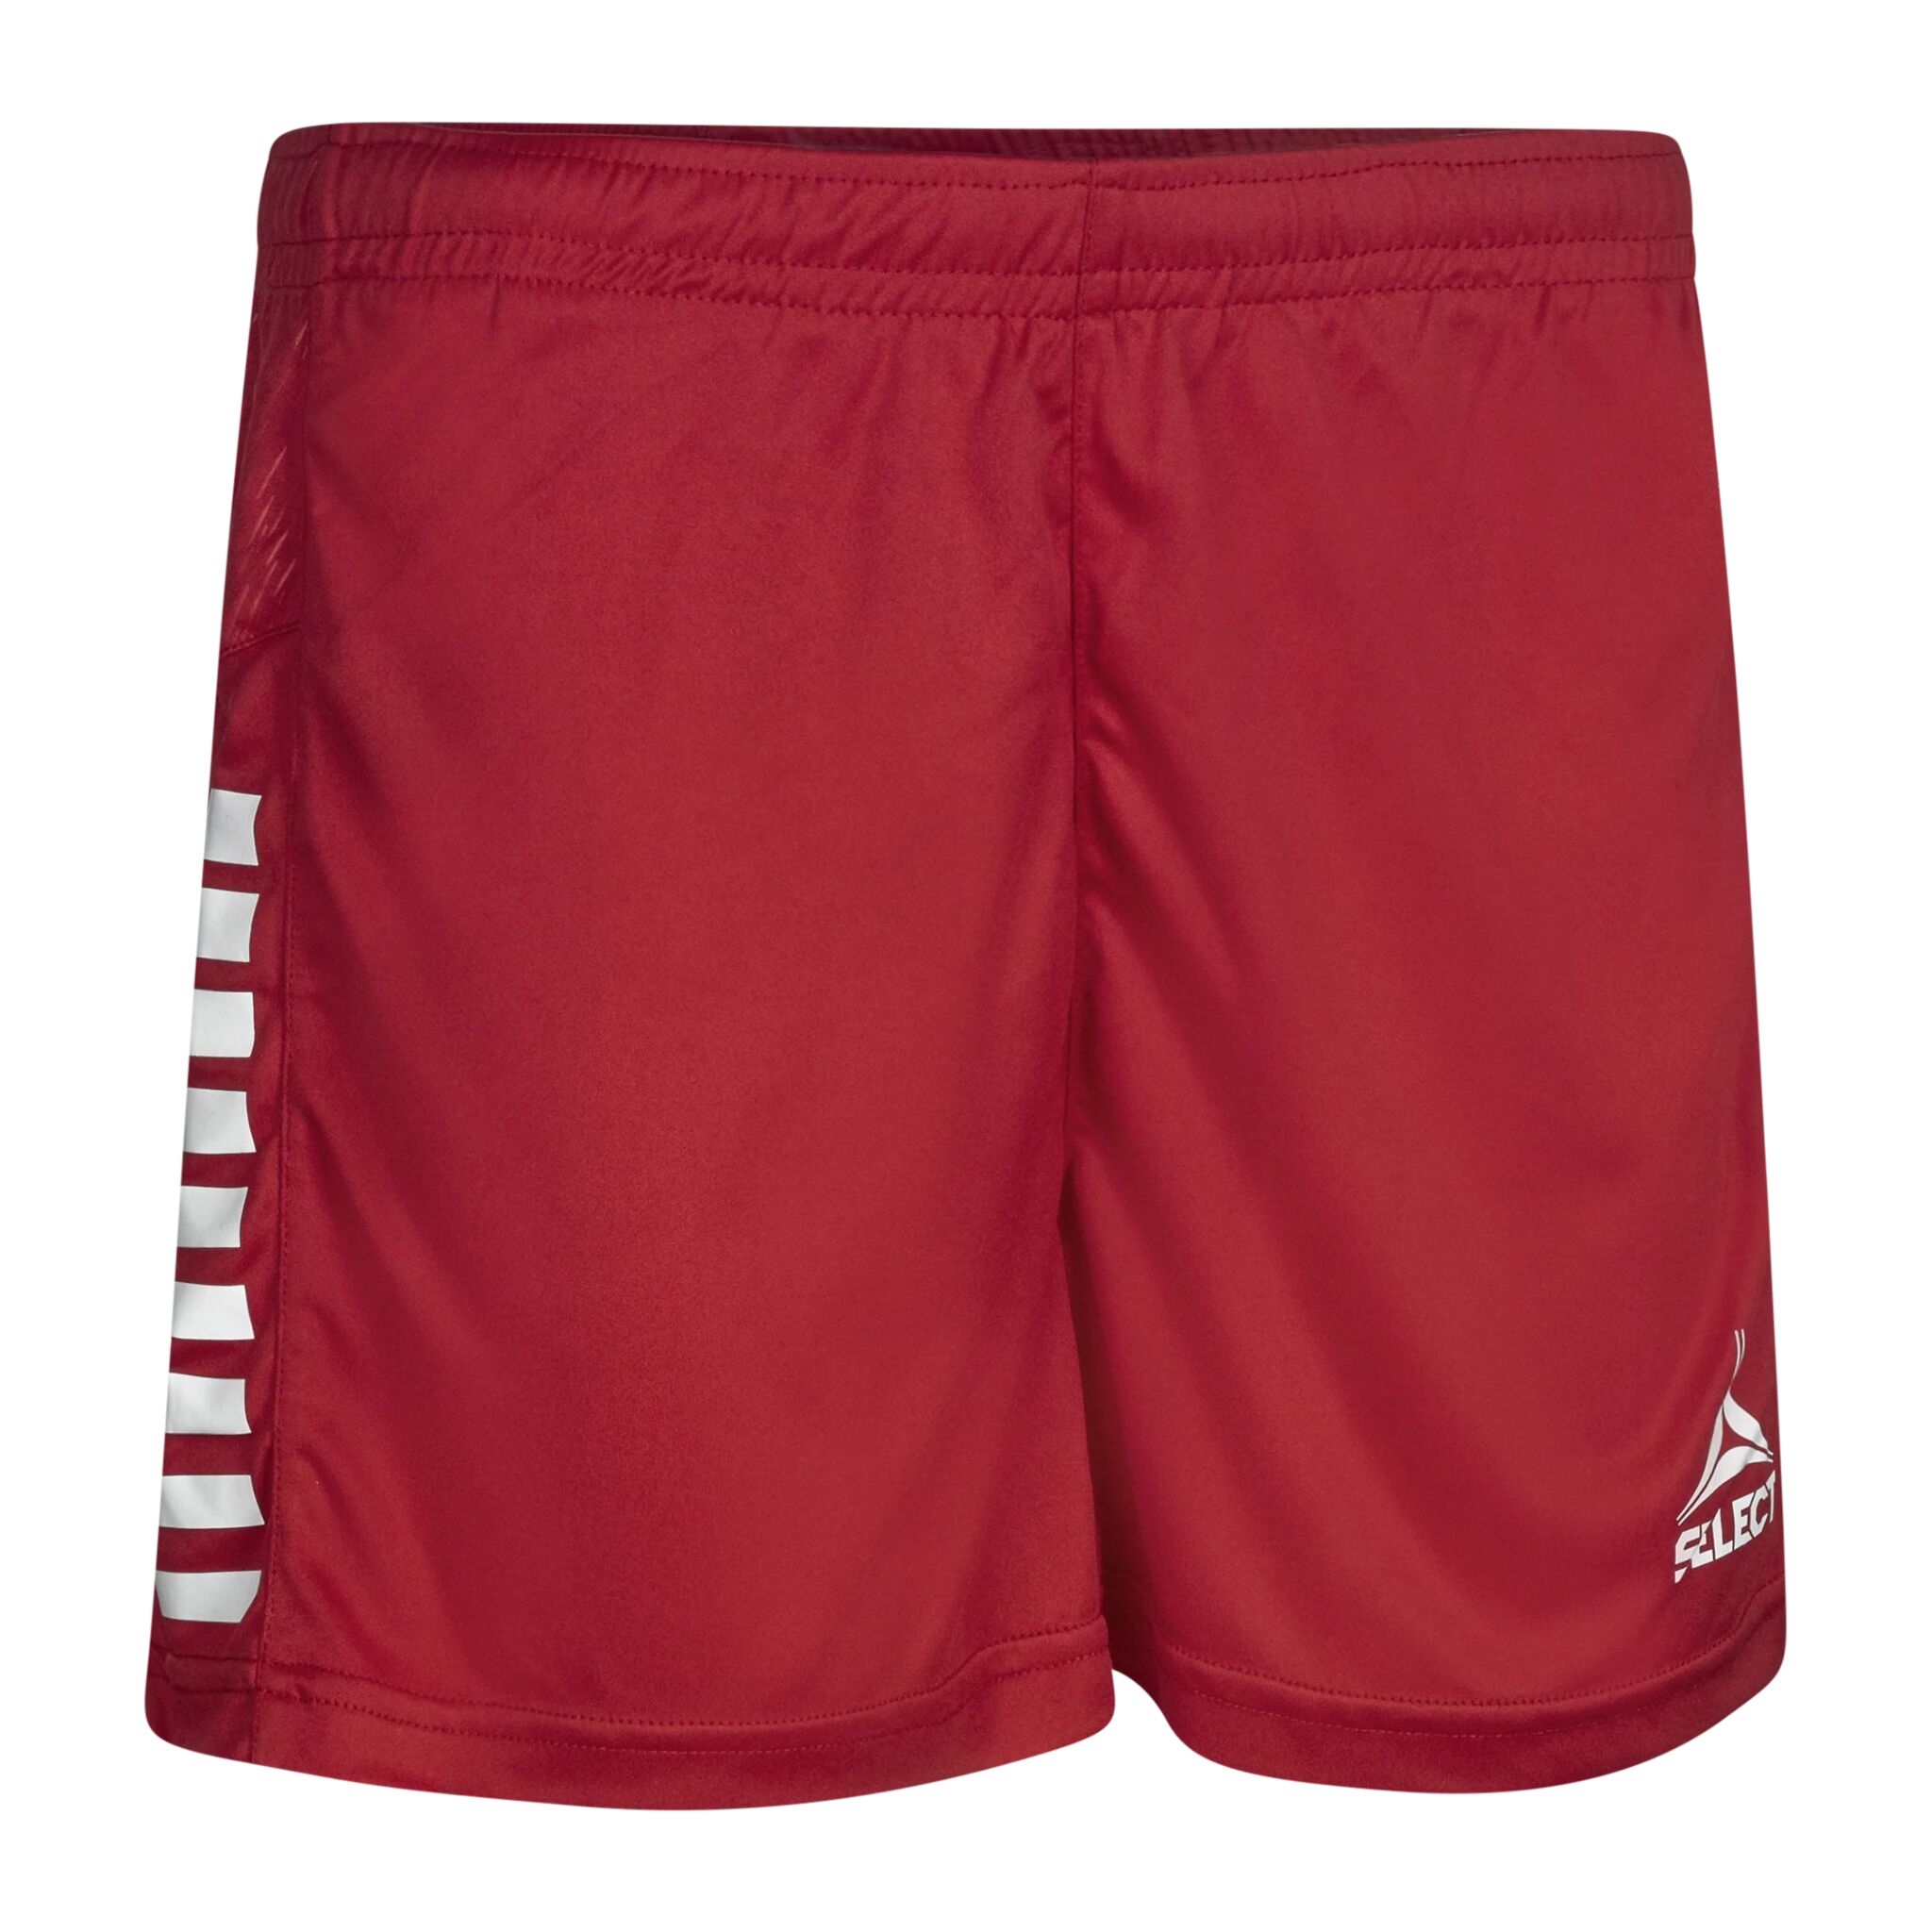 Select Player shorts Spain women, shorts dame S RED